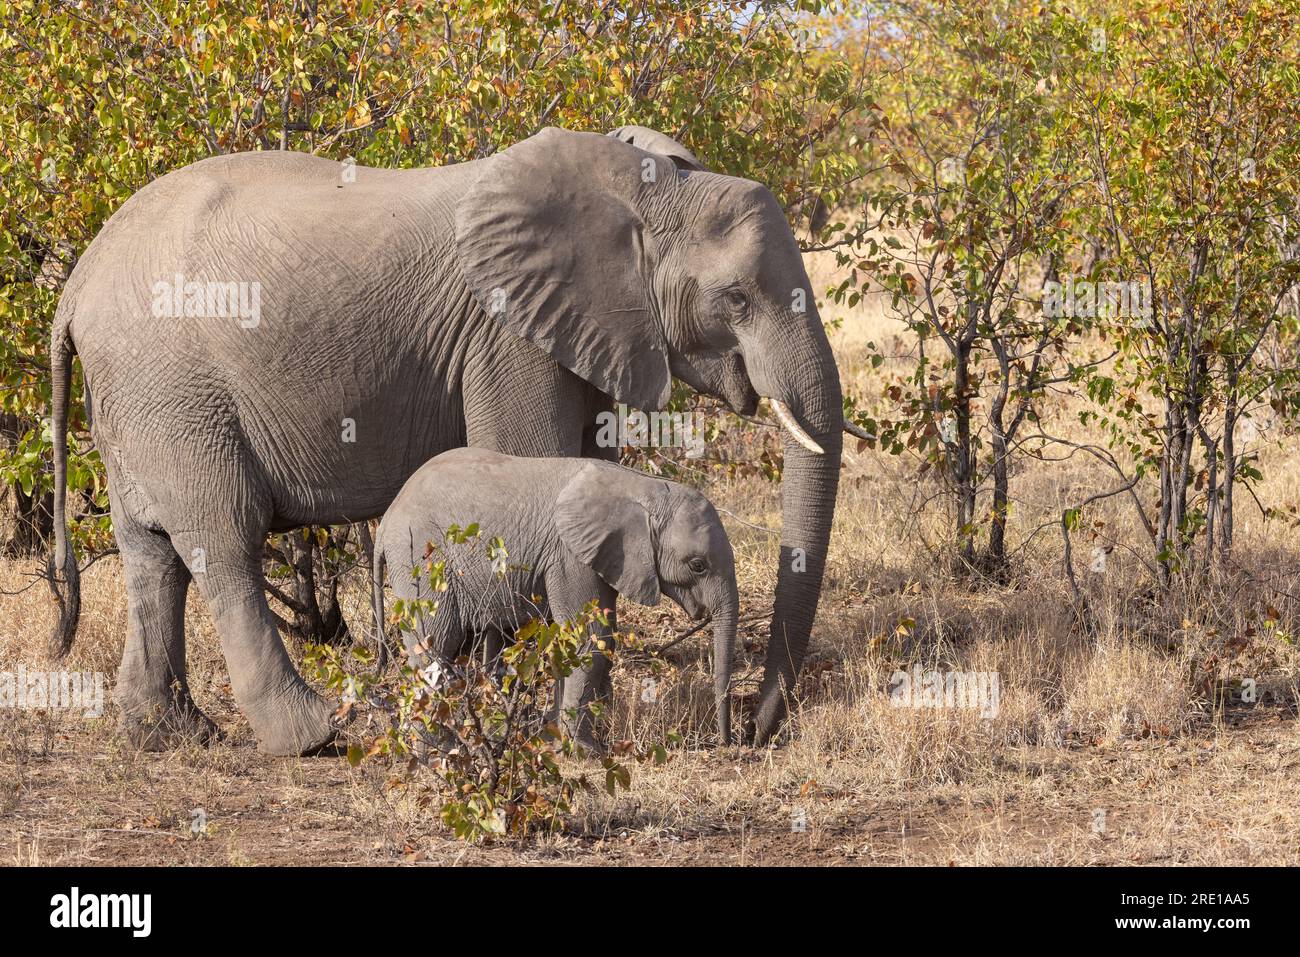 An adult female elephant with her young calf  grazing in their natural habitat in the Kruger National Park, South Africa Stock Photo